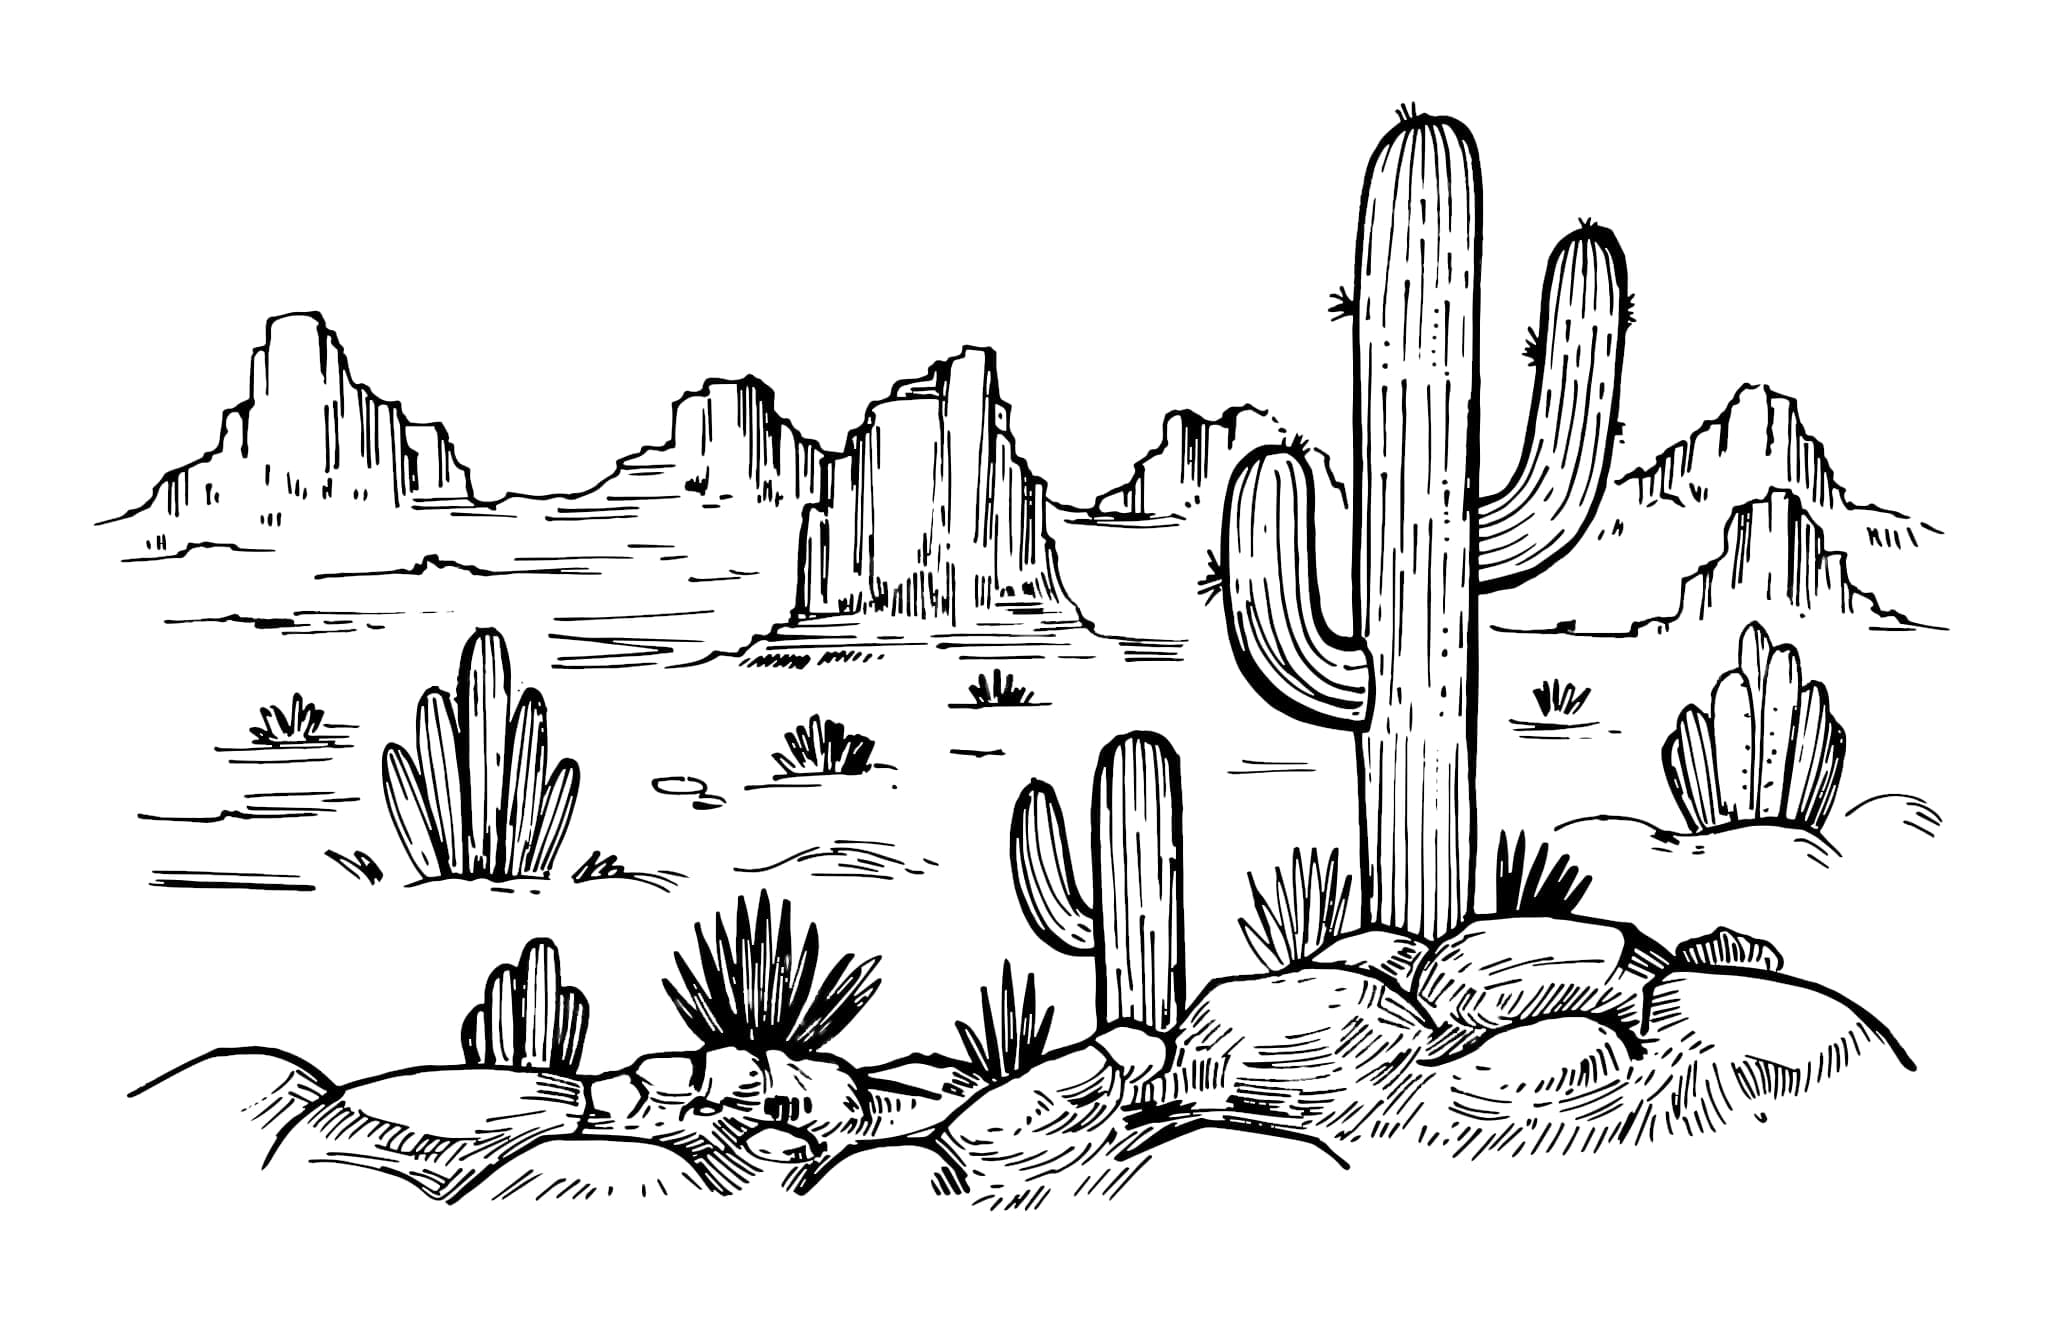 Deserted Area With Cactus And Thorns